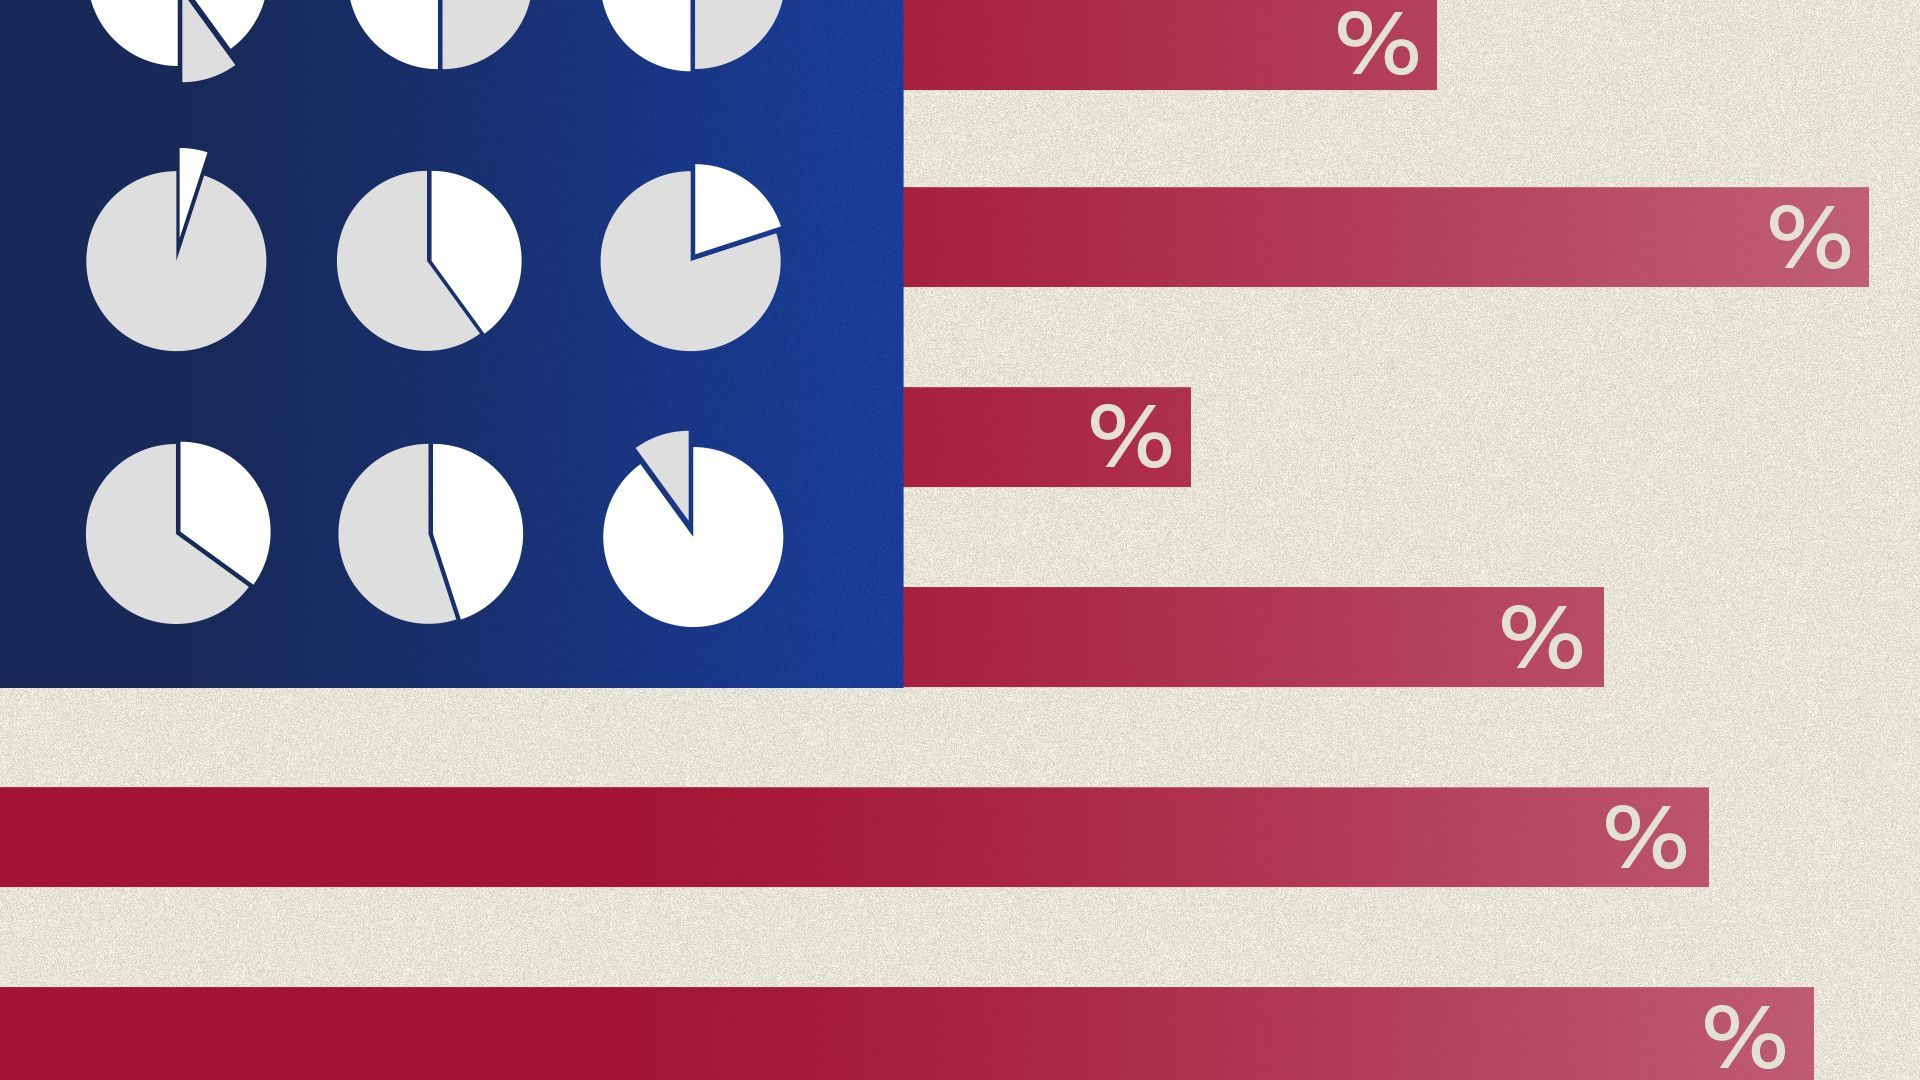 Illustration of a series of pie and bar charts laid out and colored to resemble the arrangement of the U.S. flag